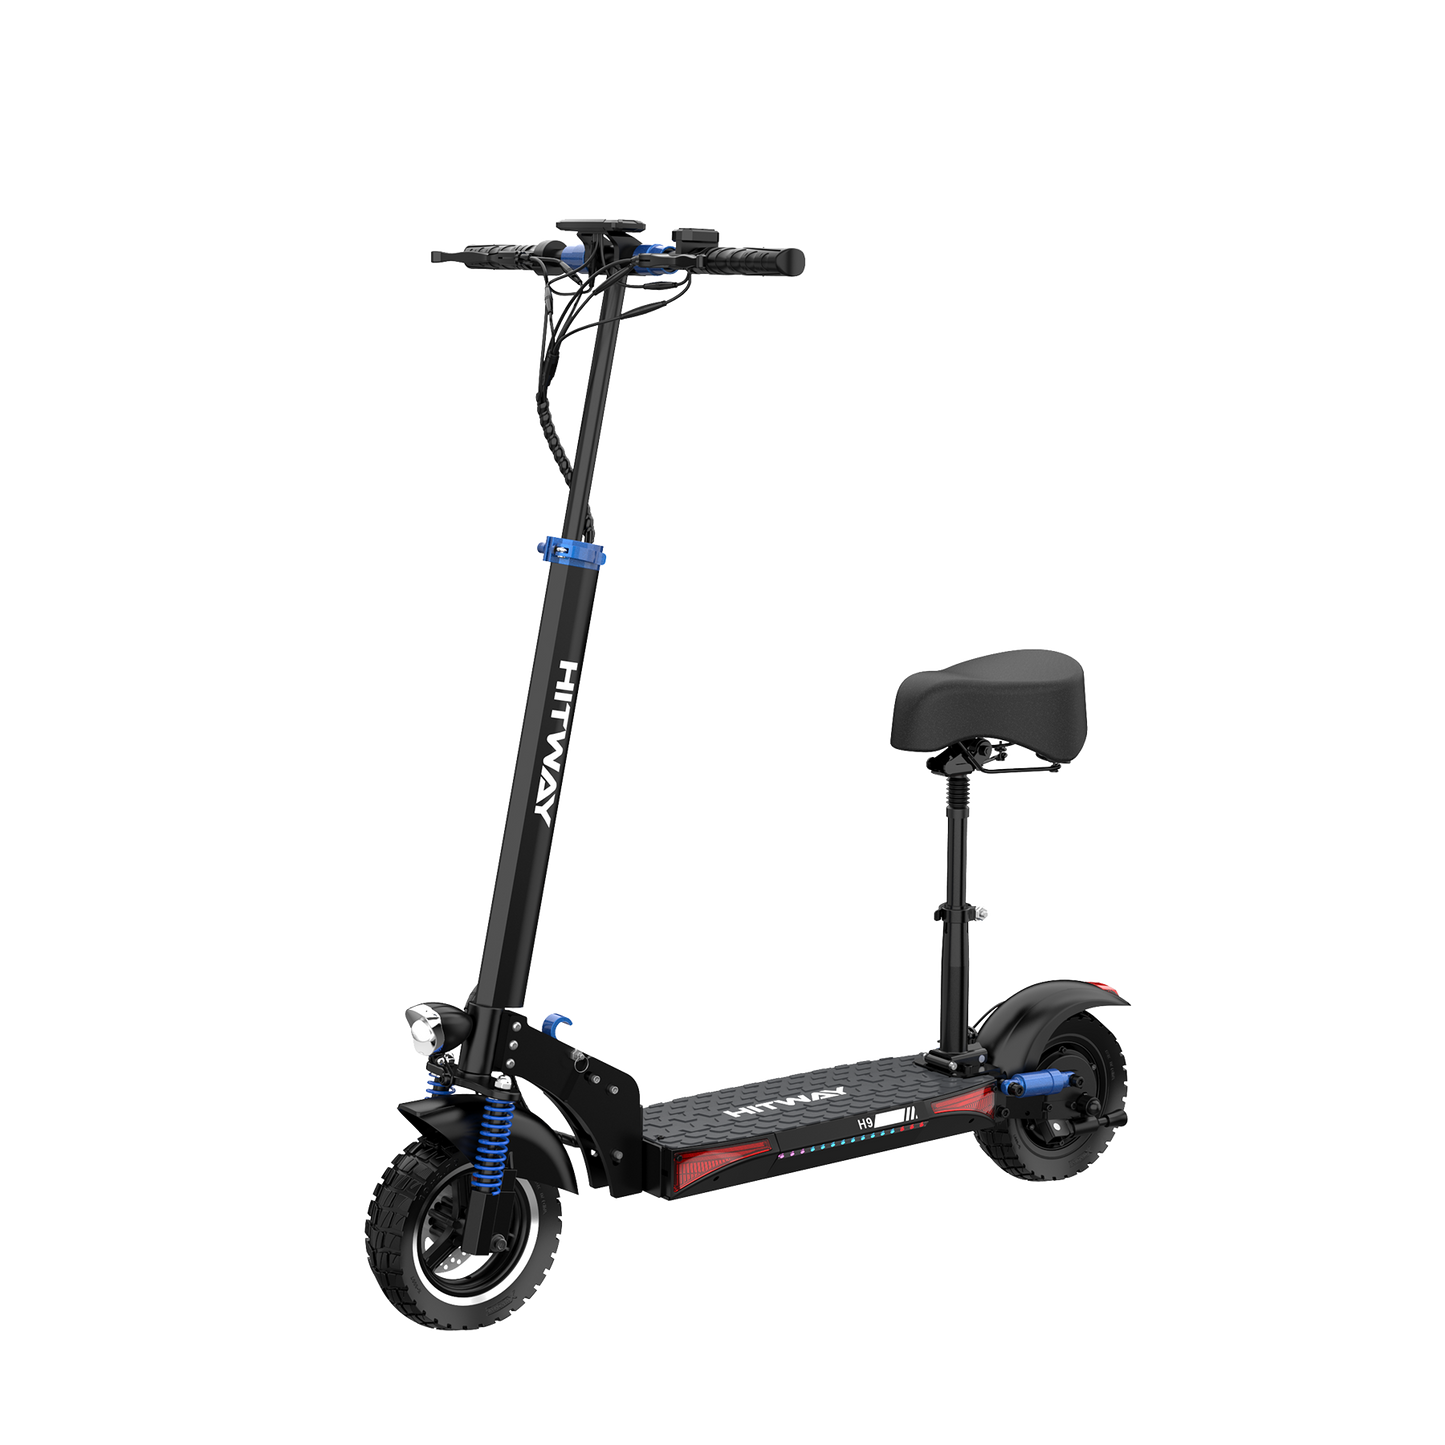 H9 Pro Electric Scooter